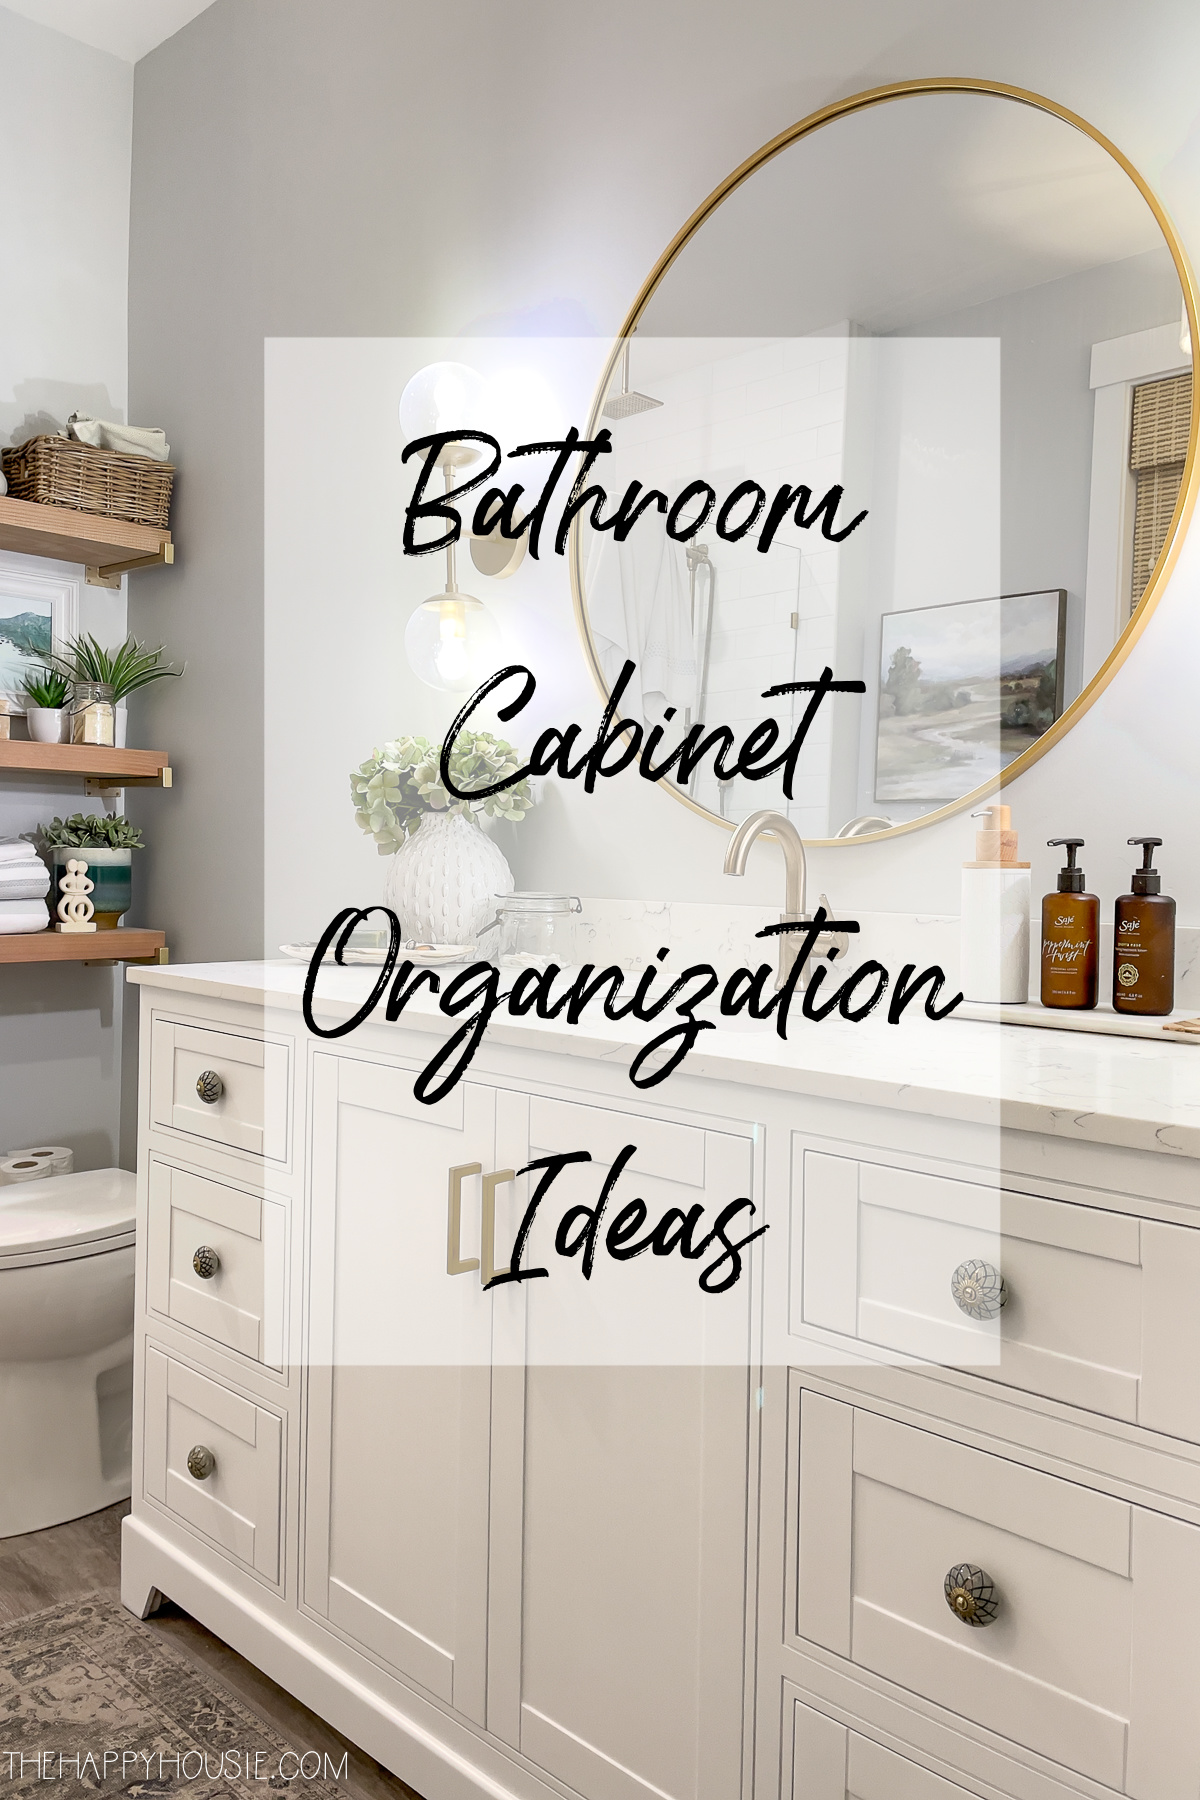 How to Organize Bathroom Cabinets   The Happy Housie